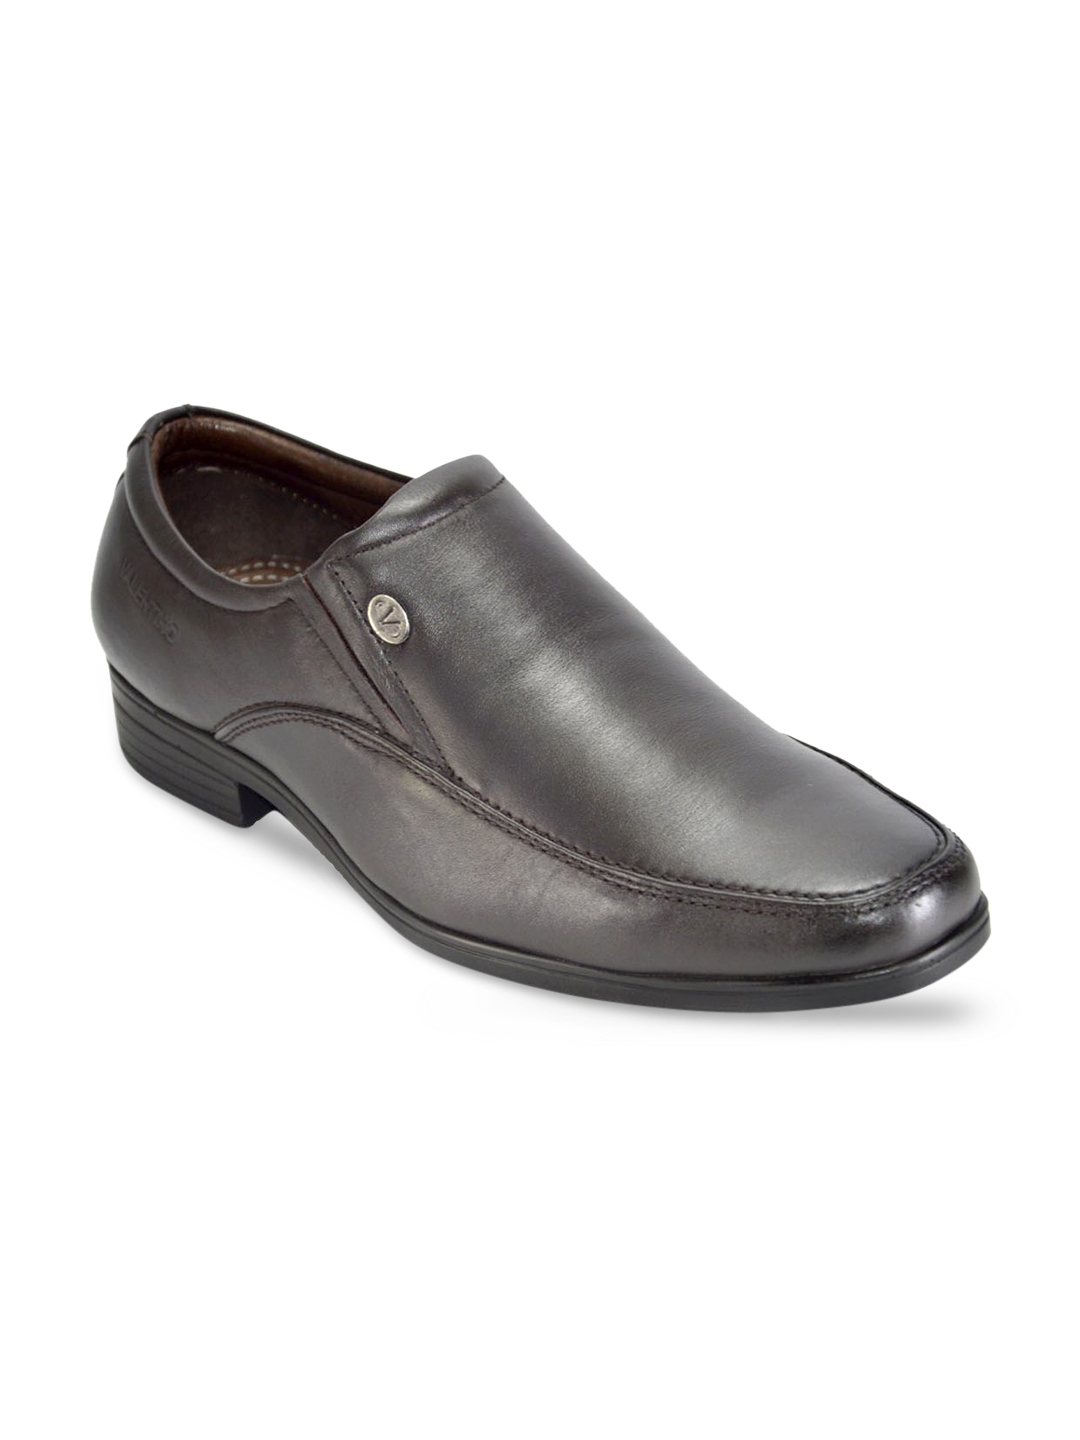 Buy Valentino Men Brown Leather Semiformal Shoes - Formal Shoes for Men  1197900 | Myntra